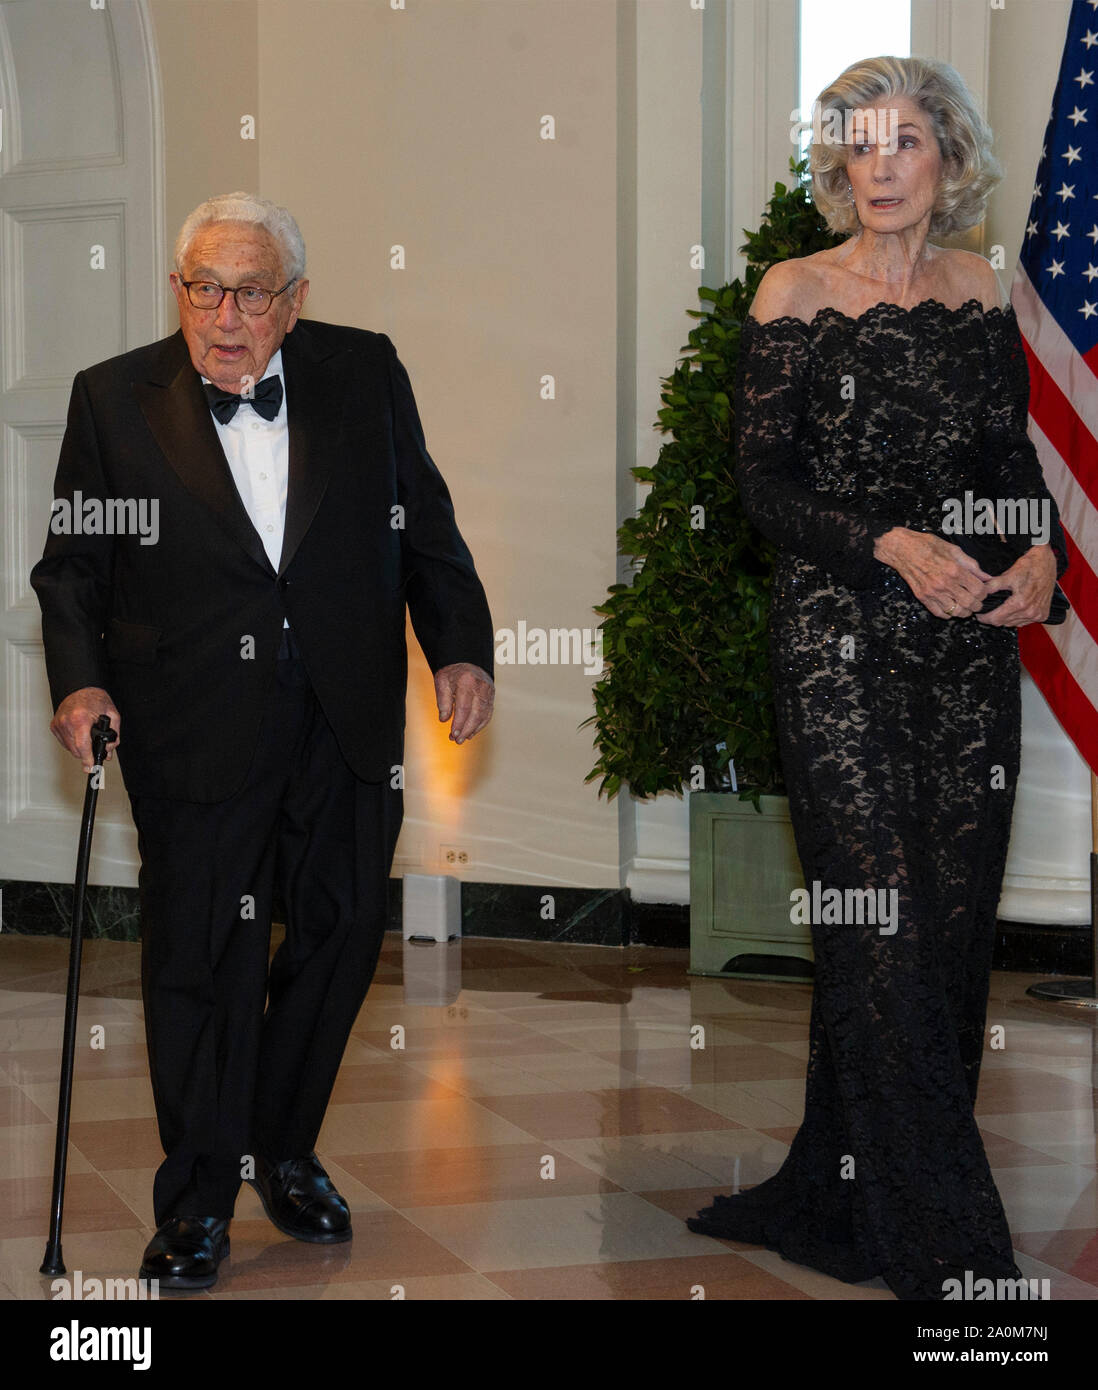 Former United States Secretary of State Henry Kissinger and Nancy Kissinger arrive for the State Dinner hosted by United States President Donald J. Trump and First lady Melania Trump in honor of Prime Minister Scott Morrison of Australia and his wife, Jenny Morrison, at the White House in Washington, DC on Friday, September 20, 2019.Credit: Ron Sachs/Pool via CNP/MediaPunch Stock Photo